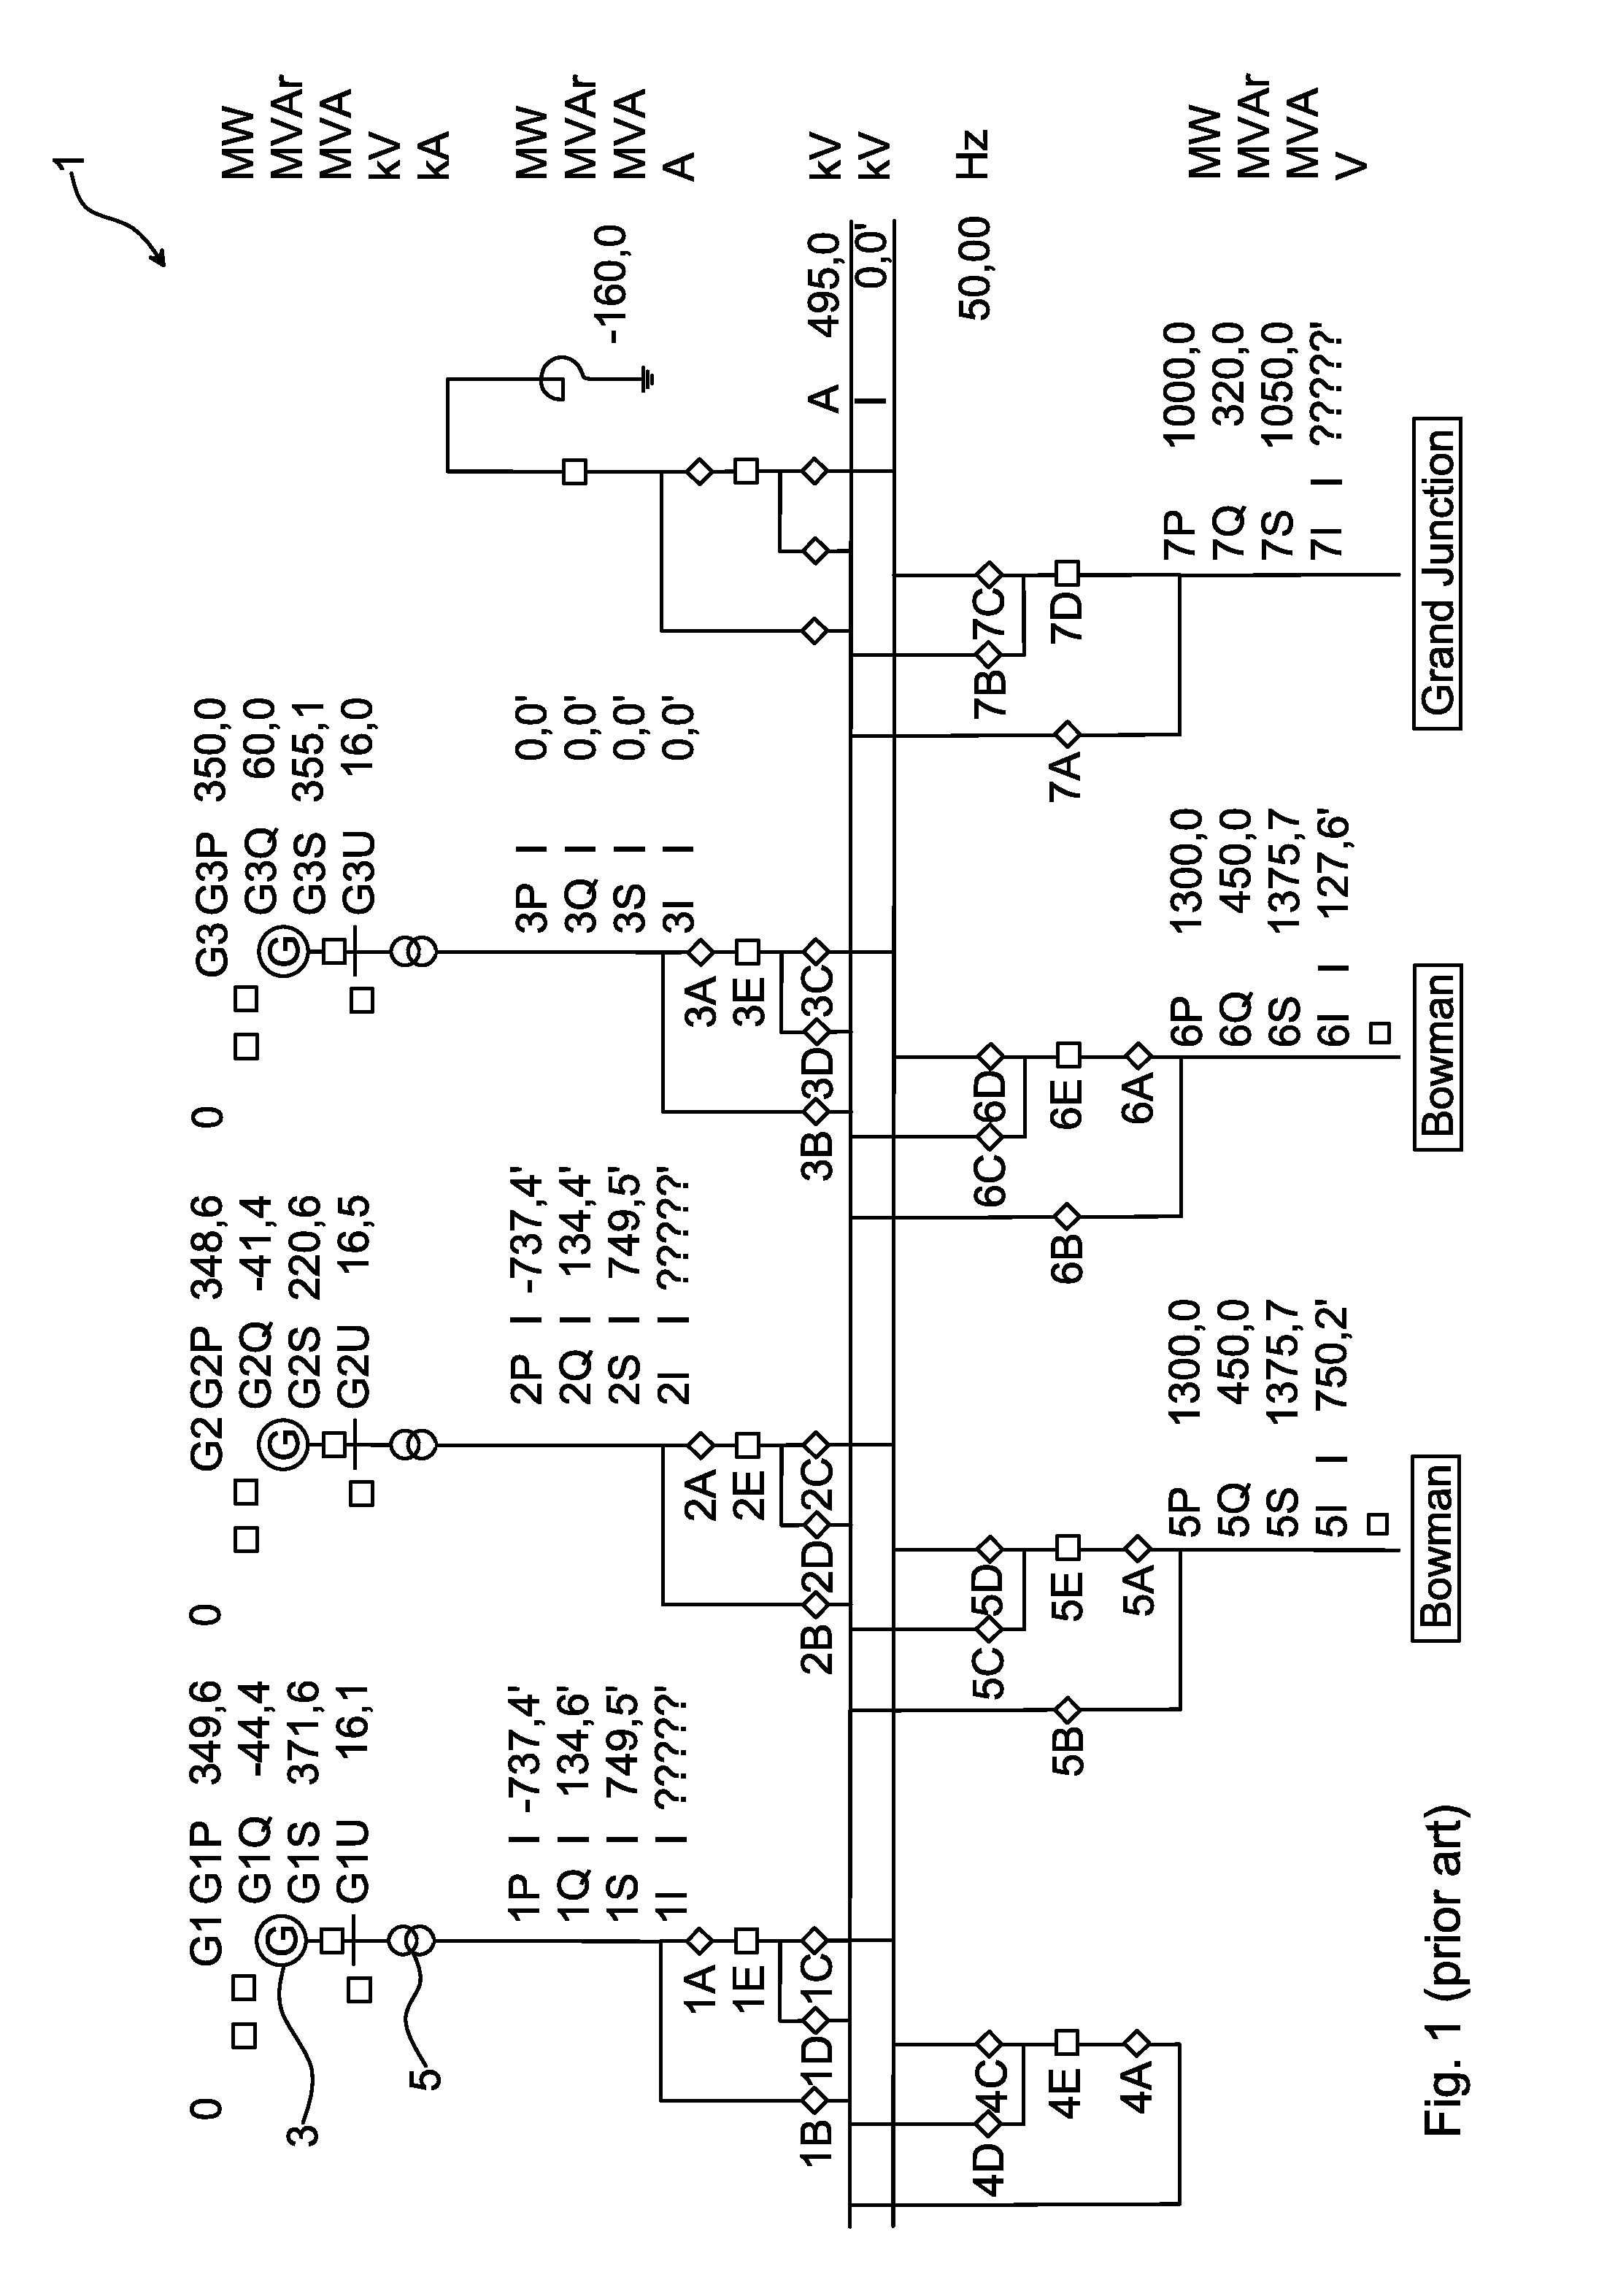 Method and system for facilitating control of an industrial system